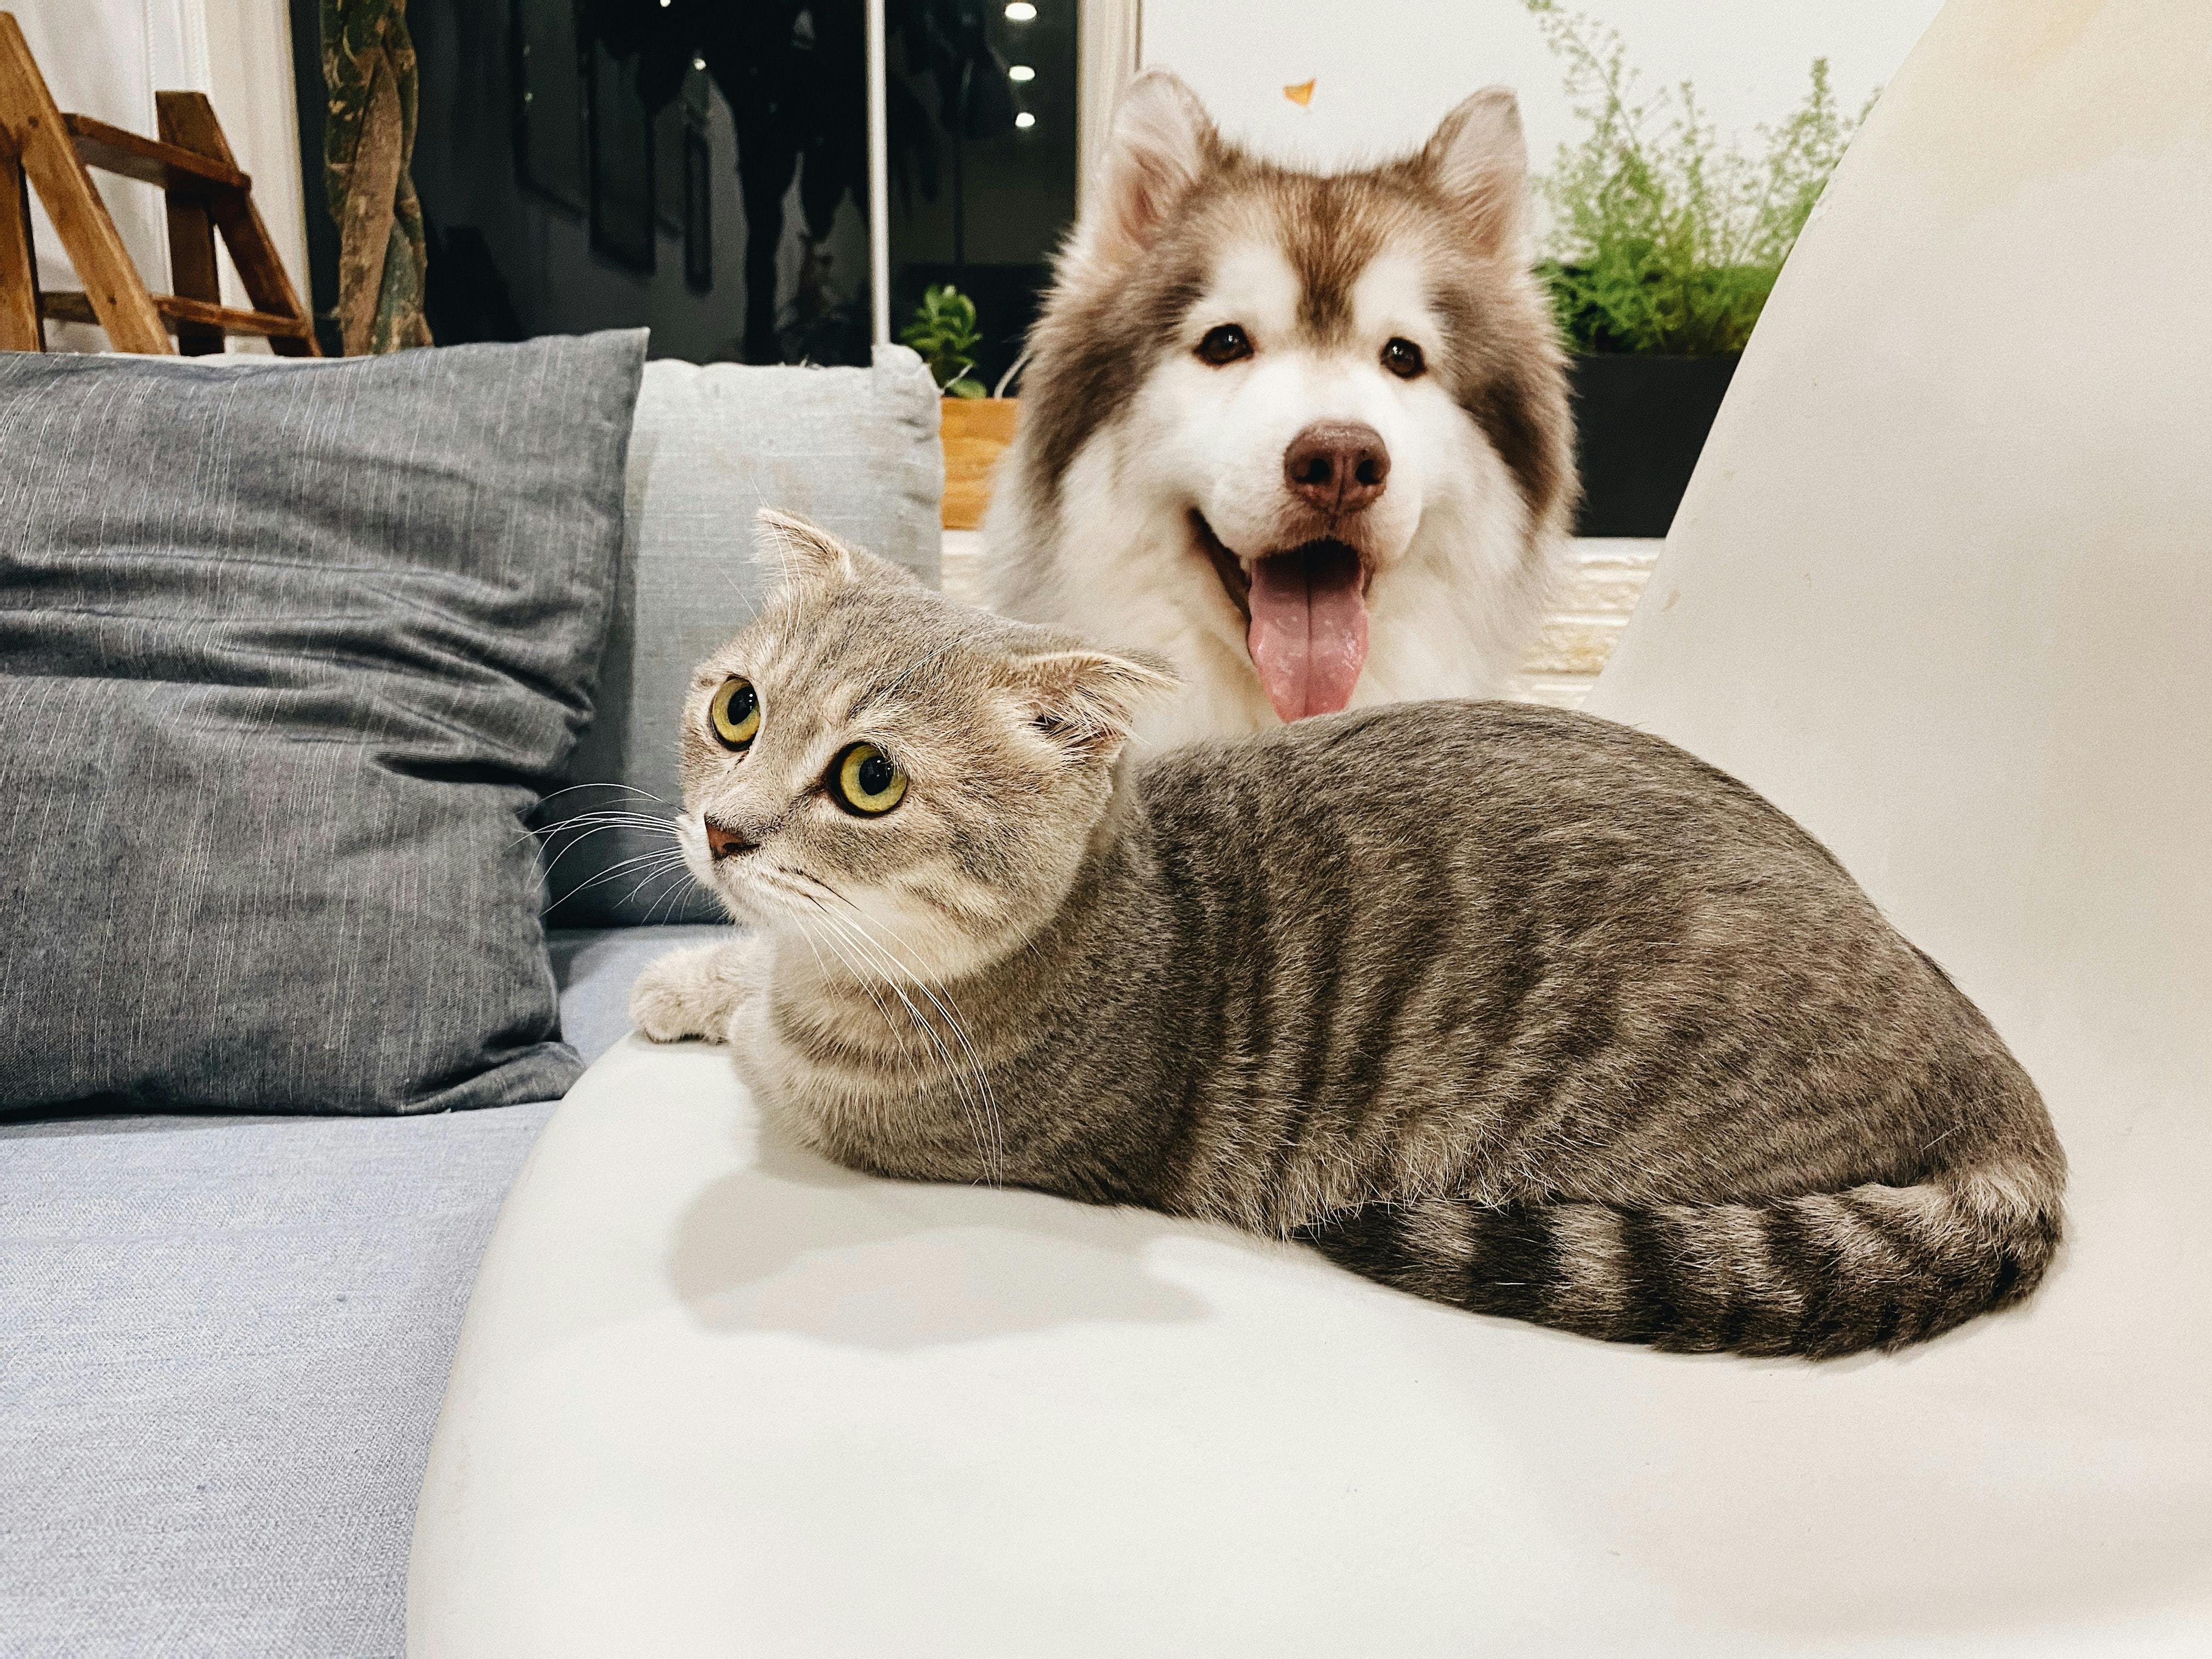 Dog and cat sitting on a couch together.